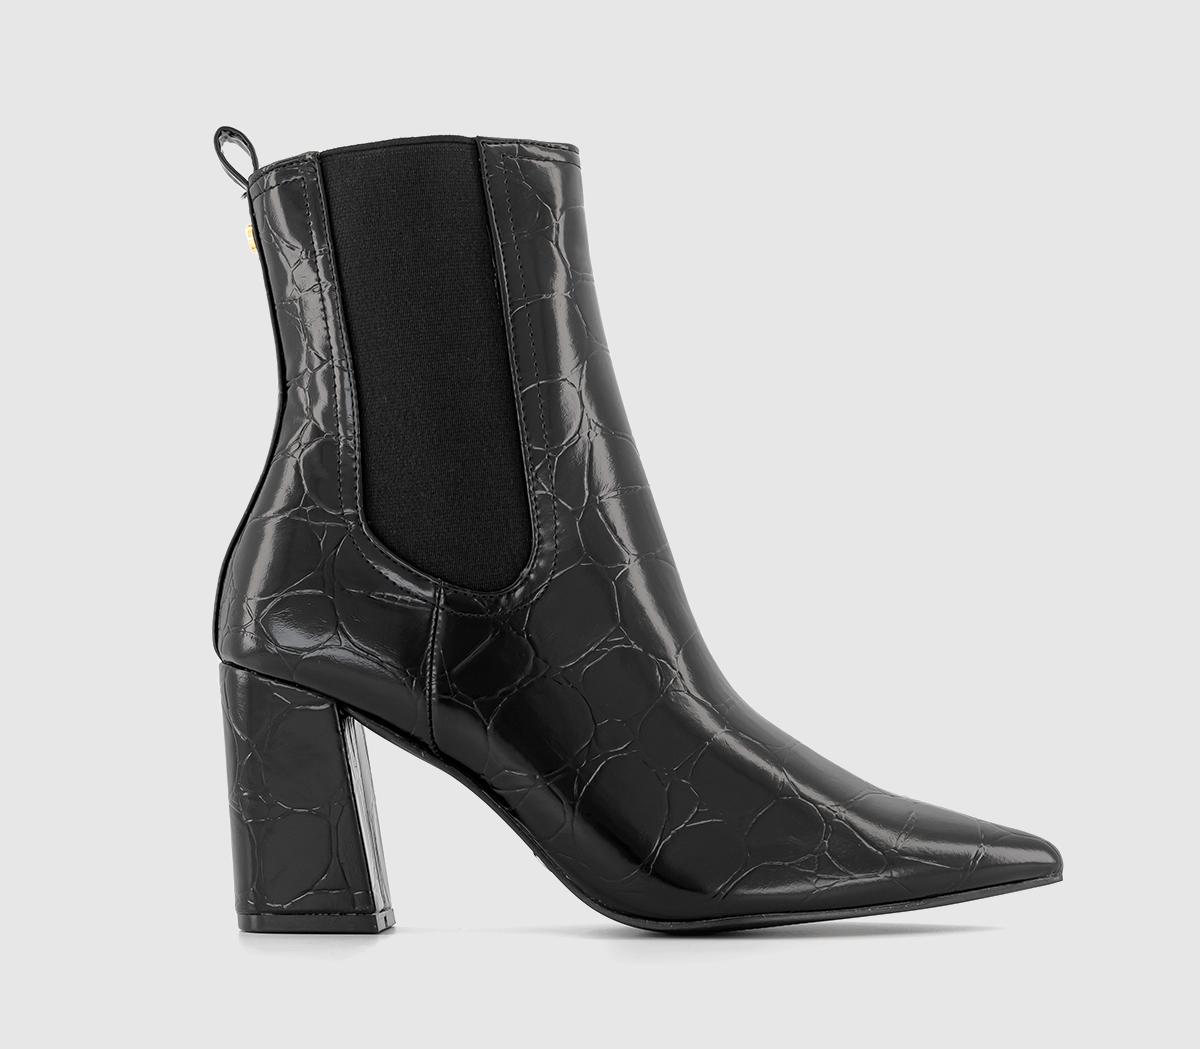 OFFICEAdvance Pointed Toe Chelsea BootsBlack Patent Croc Embossed